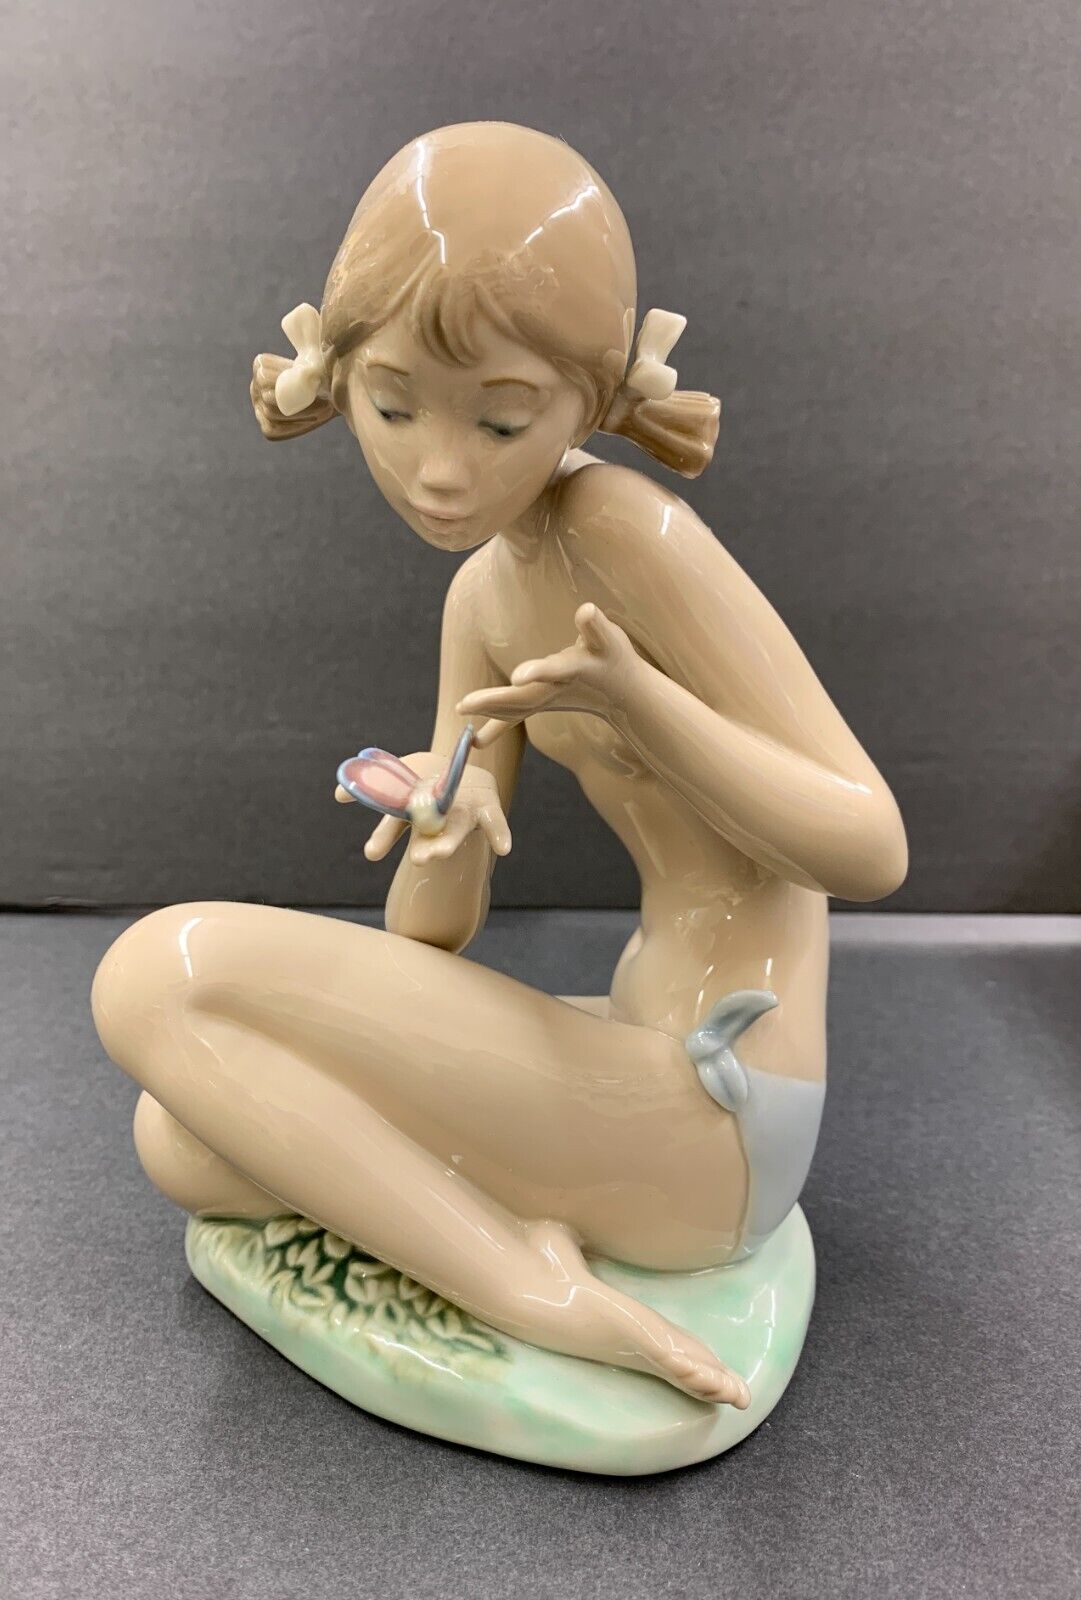 LLADRO FIGURINE “FREE AS A BUTTERLY” 1483